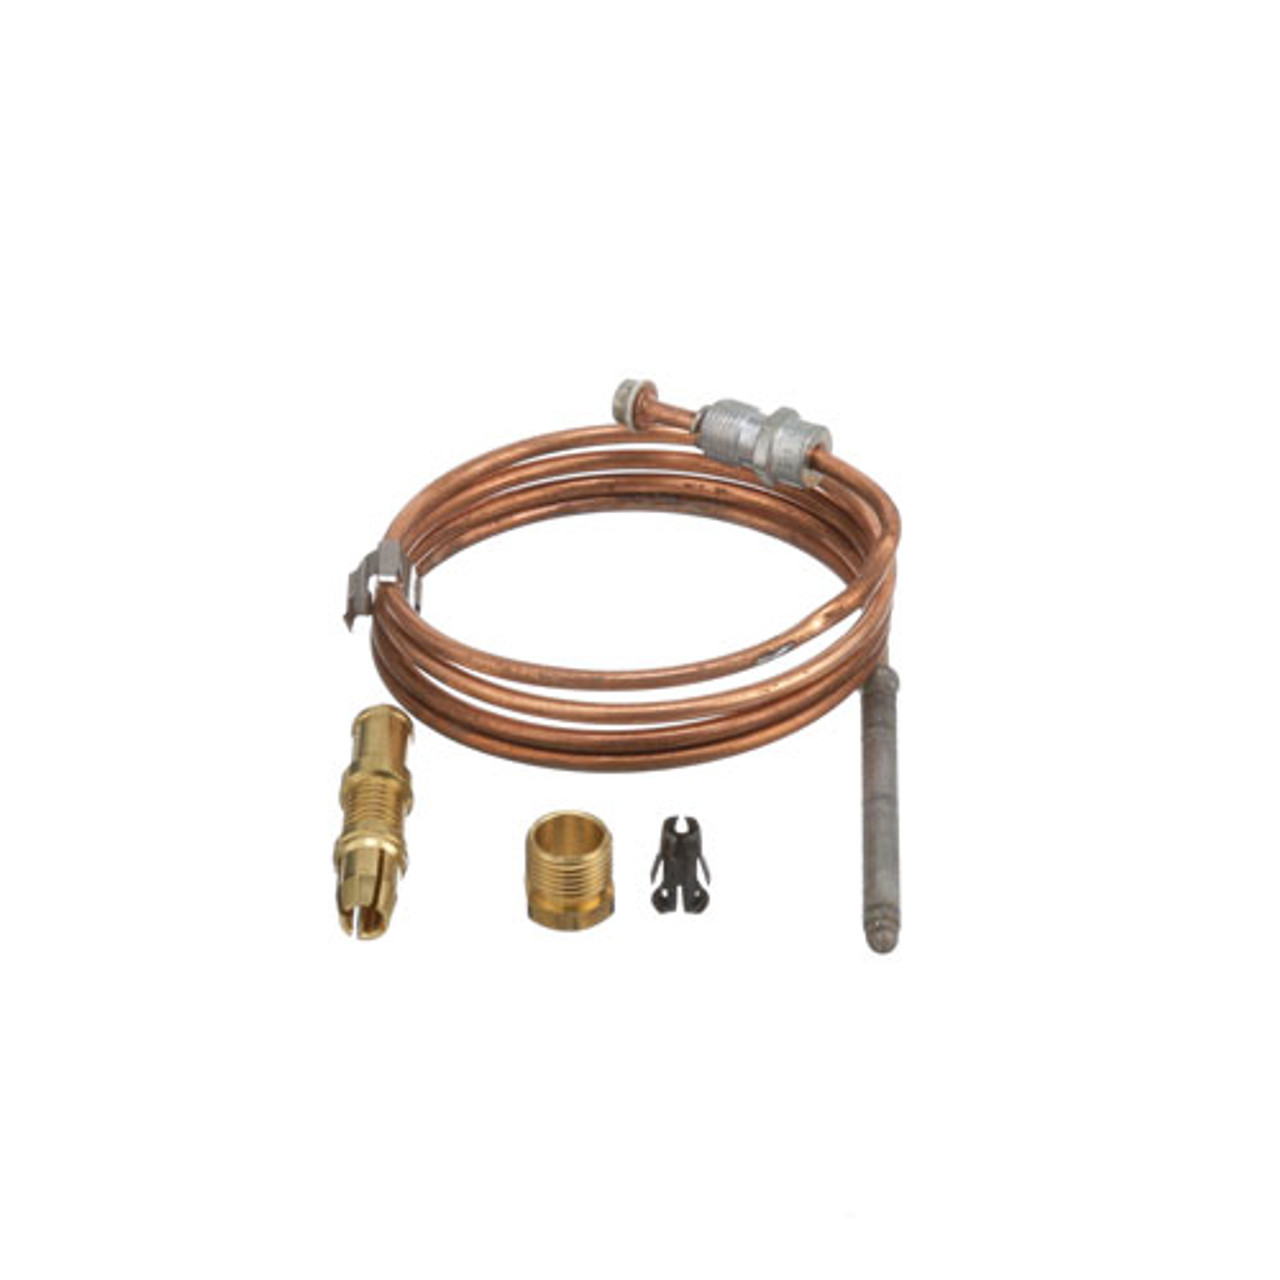 Thermocouple - 36" - Replacement Part For Toastmaster A11241